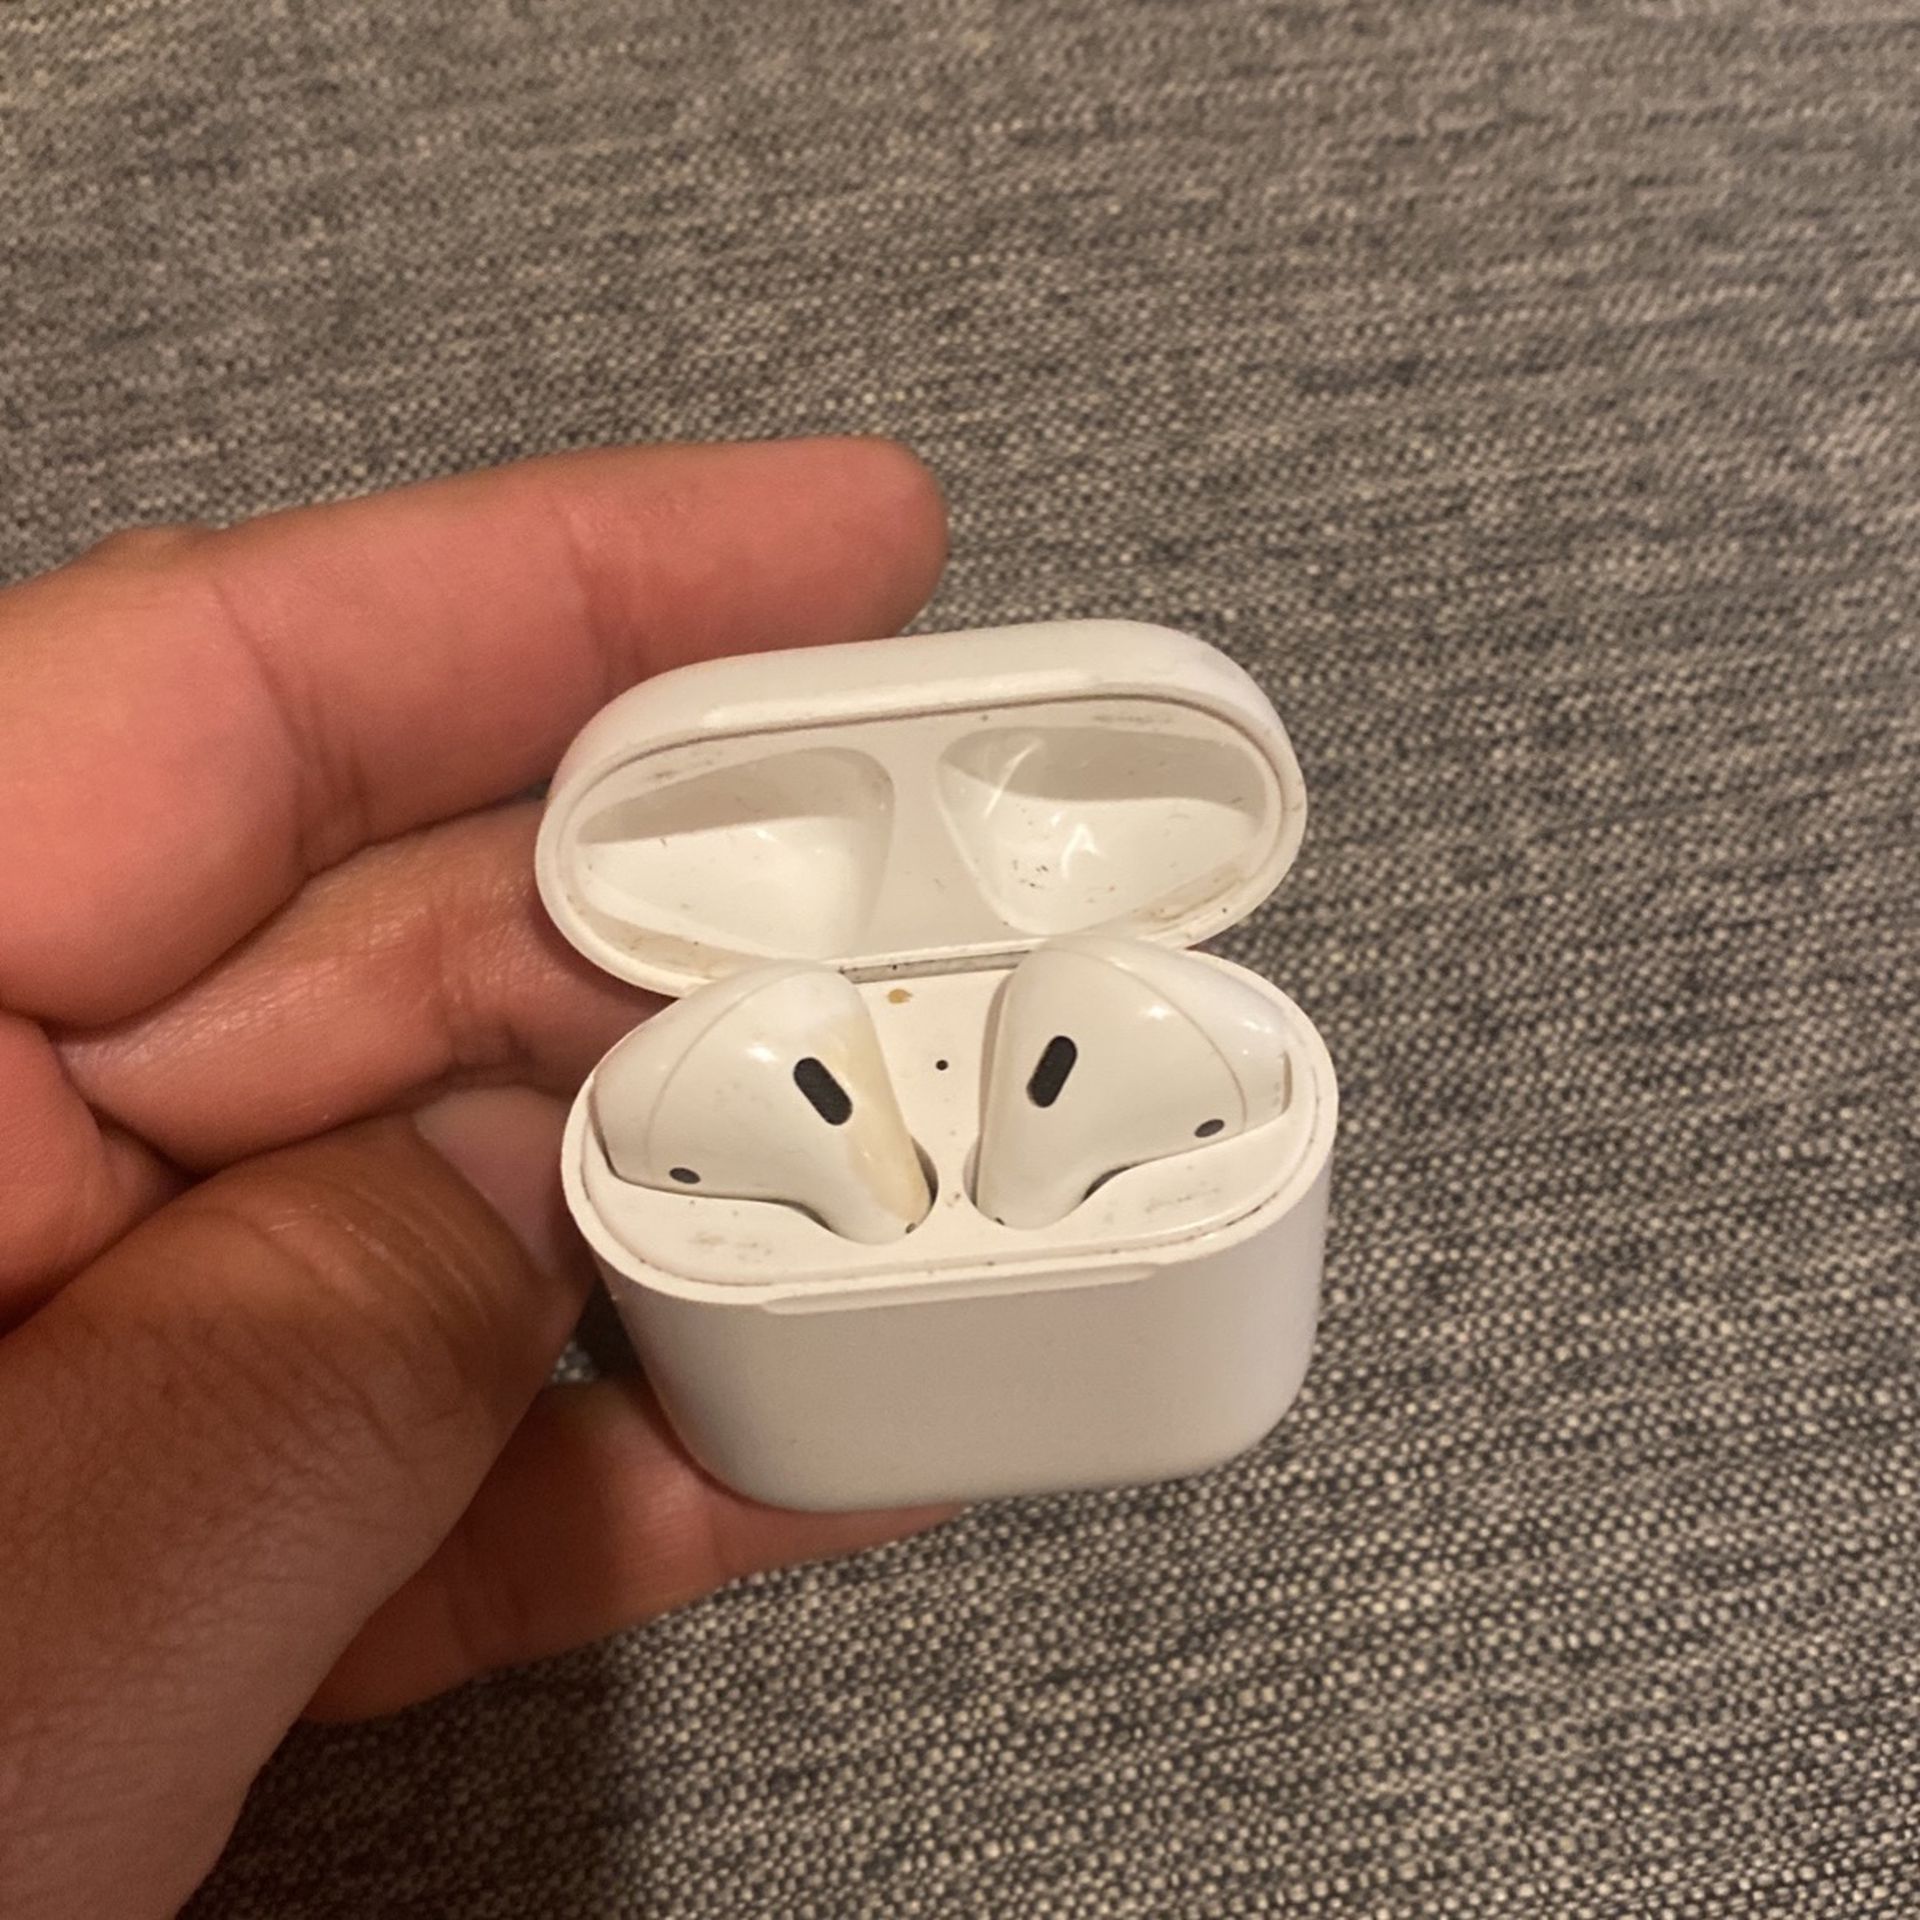 Apple Airpods 1st Generation If You Can See This Is Because Still Available